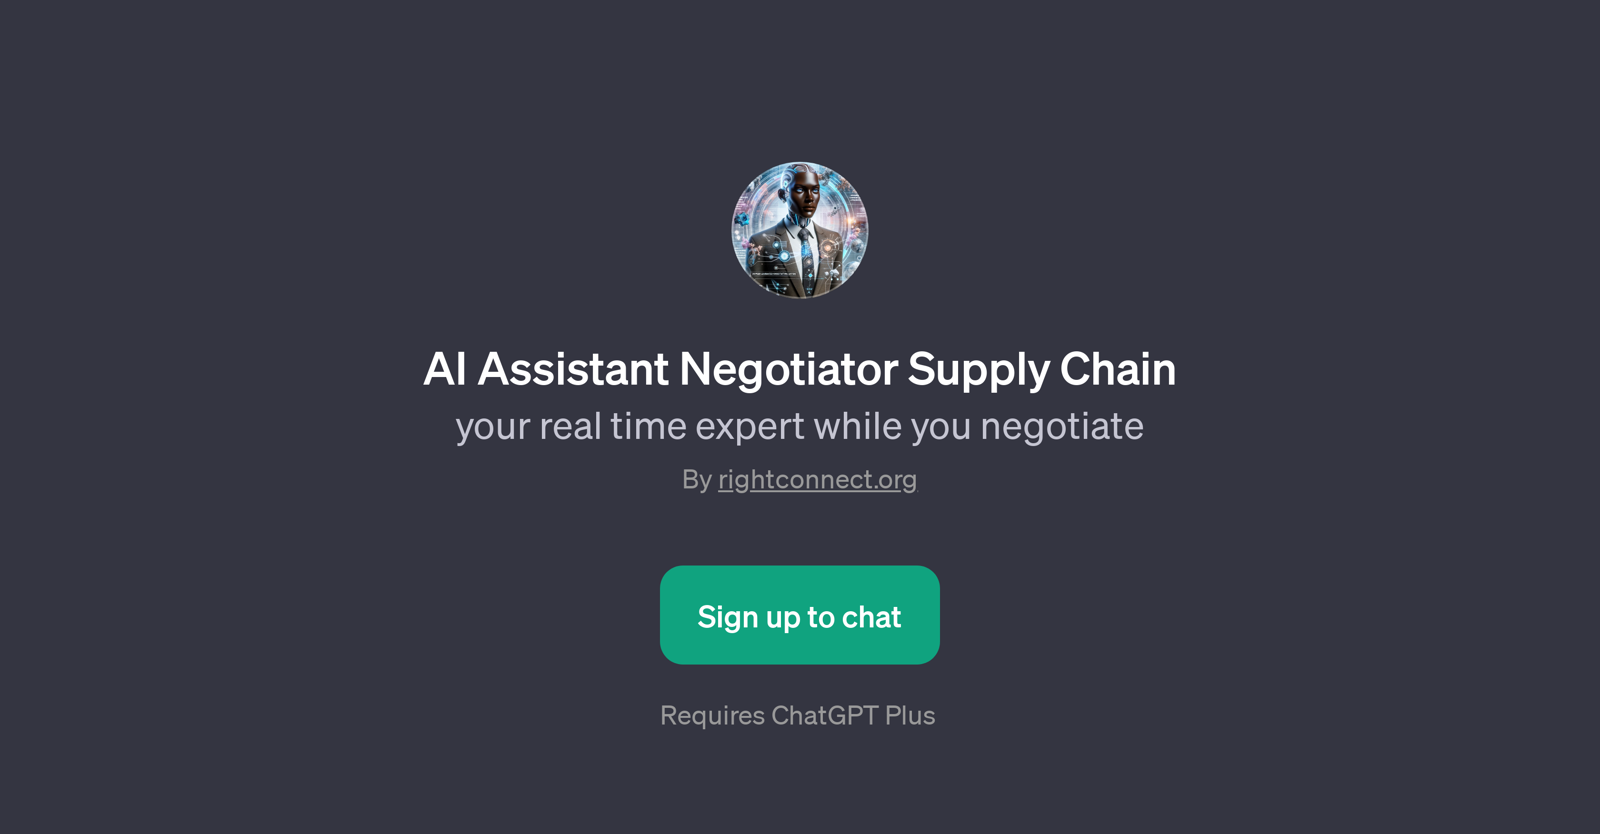 AI Assistant Negotiator Supply Chain website